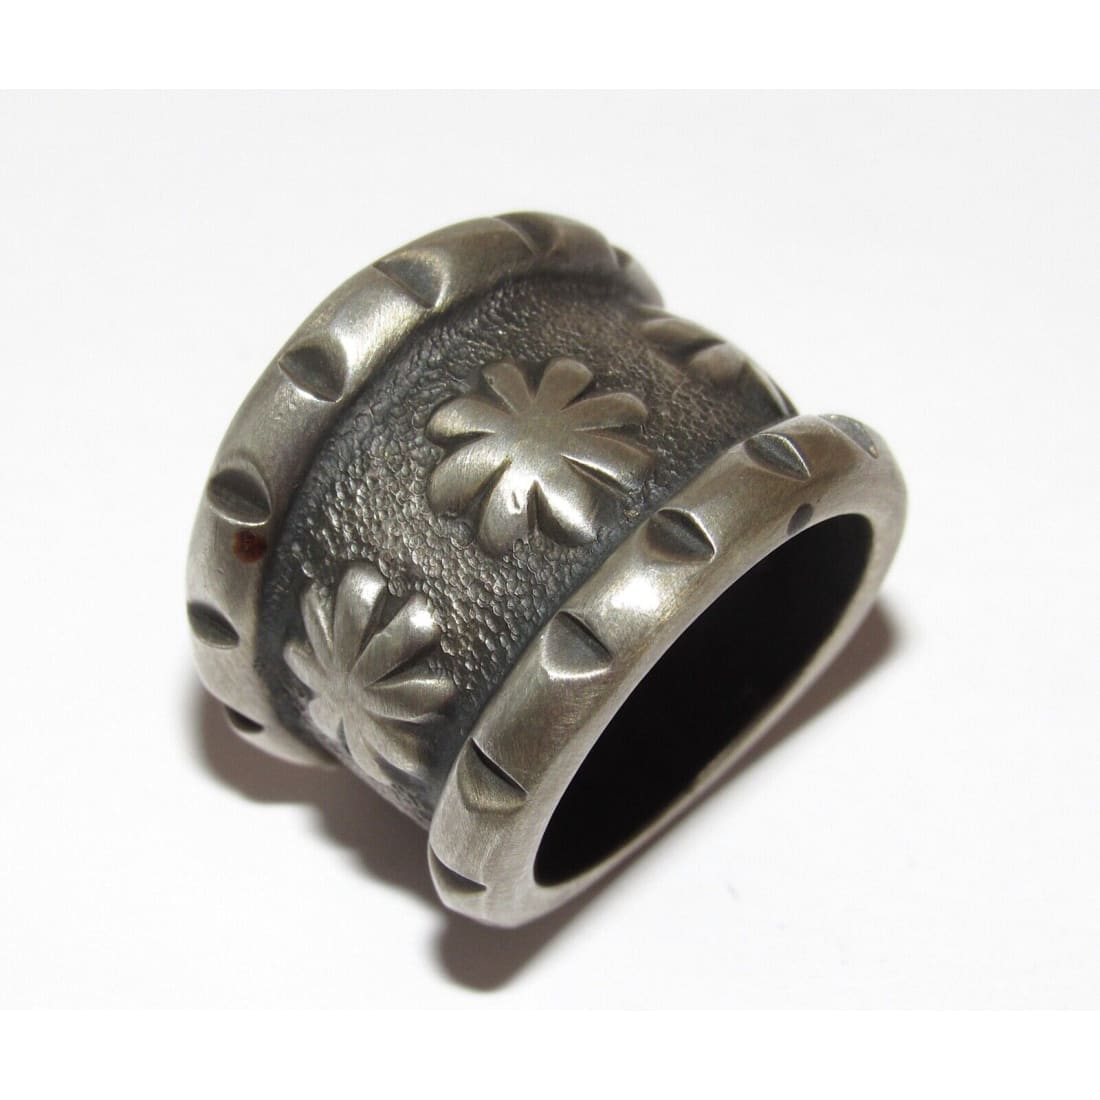 Navajo Tufa Cast Band Ring Size 8 Sterling Silver by Monty